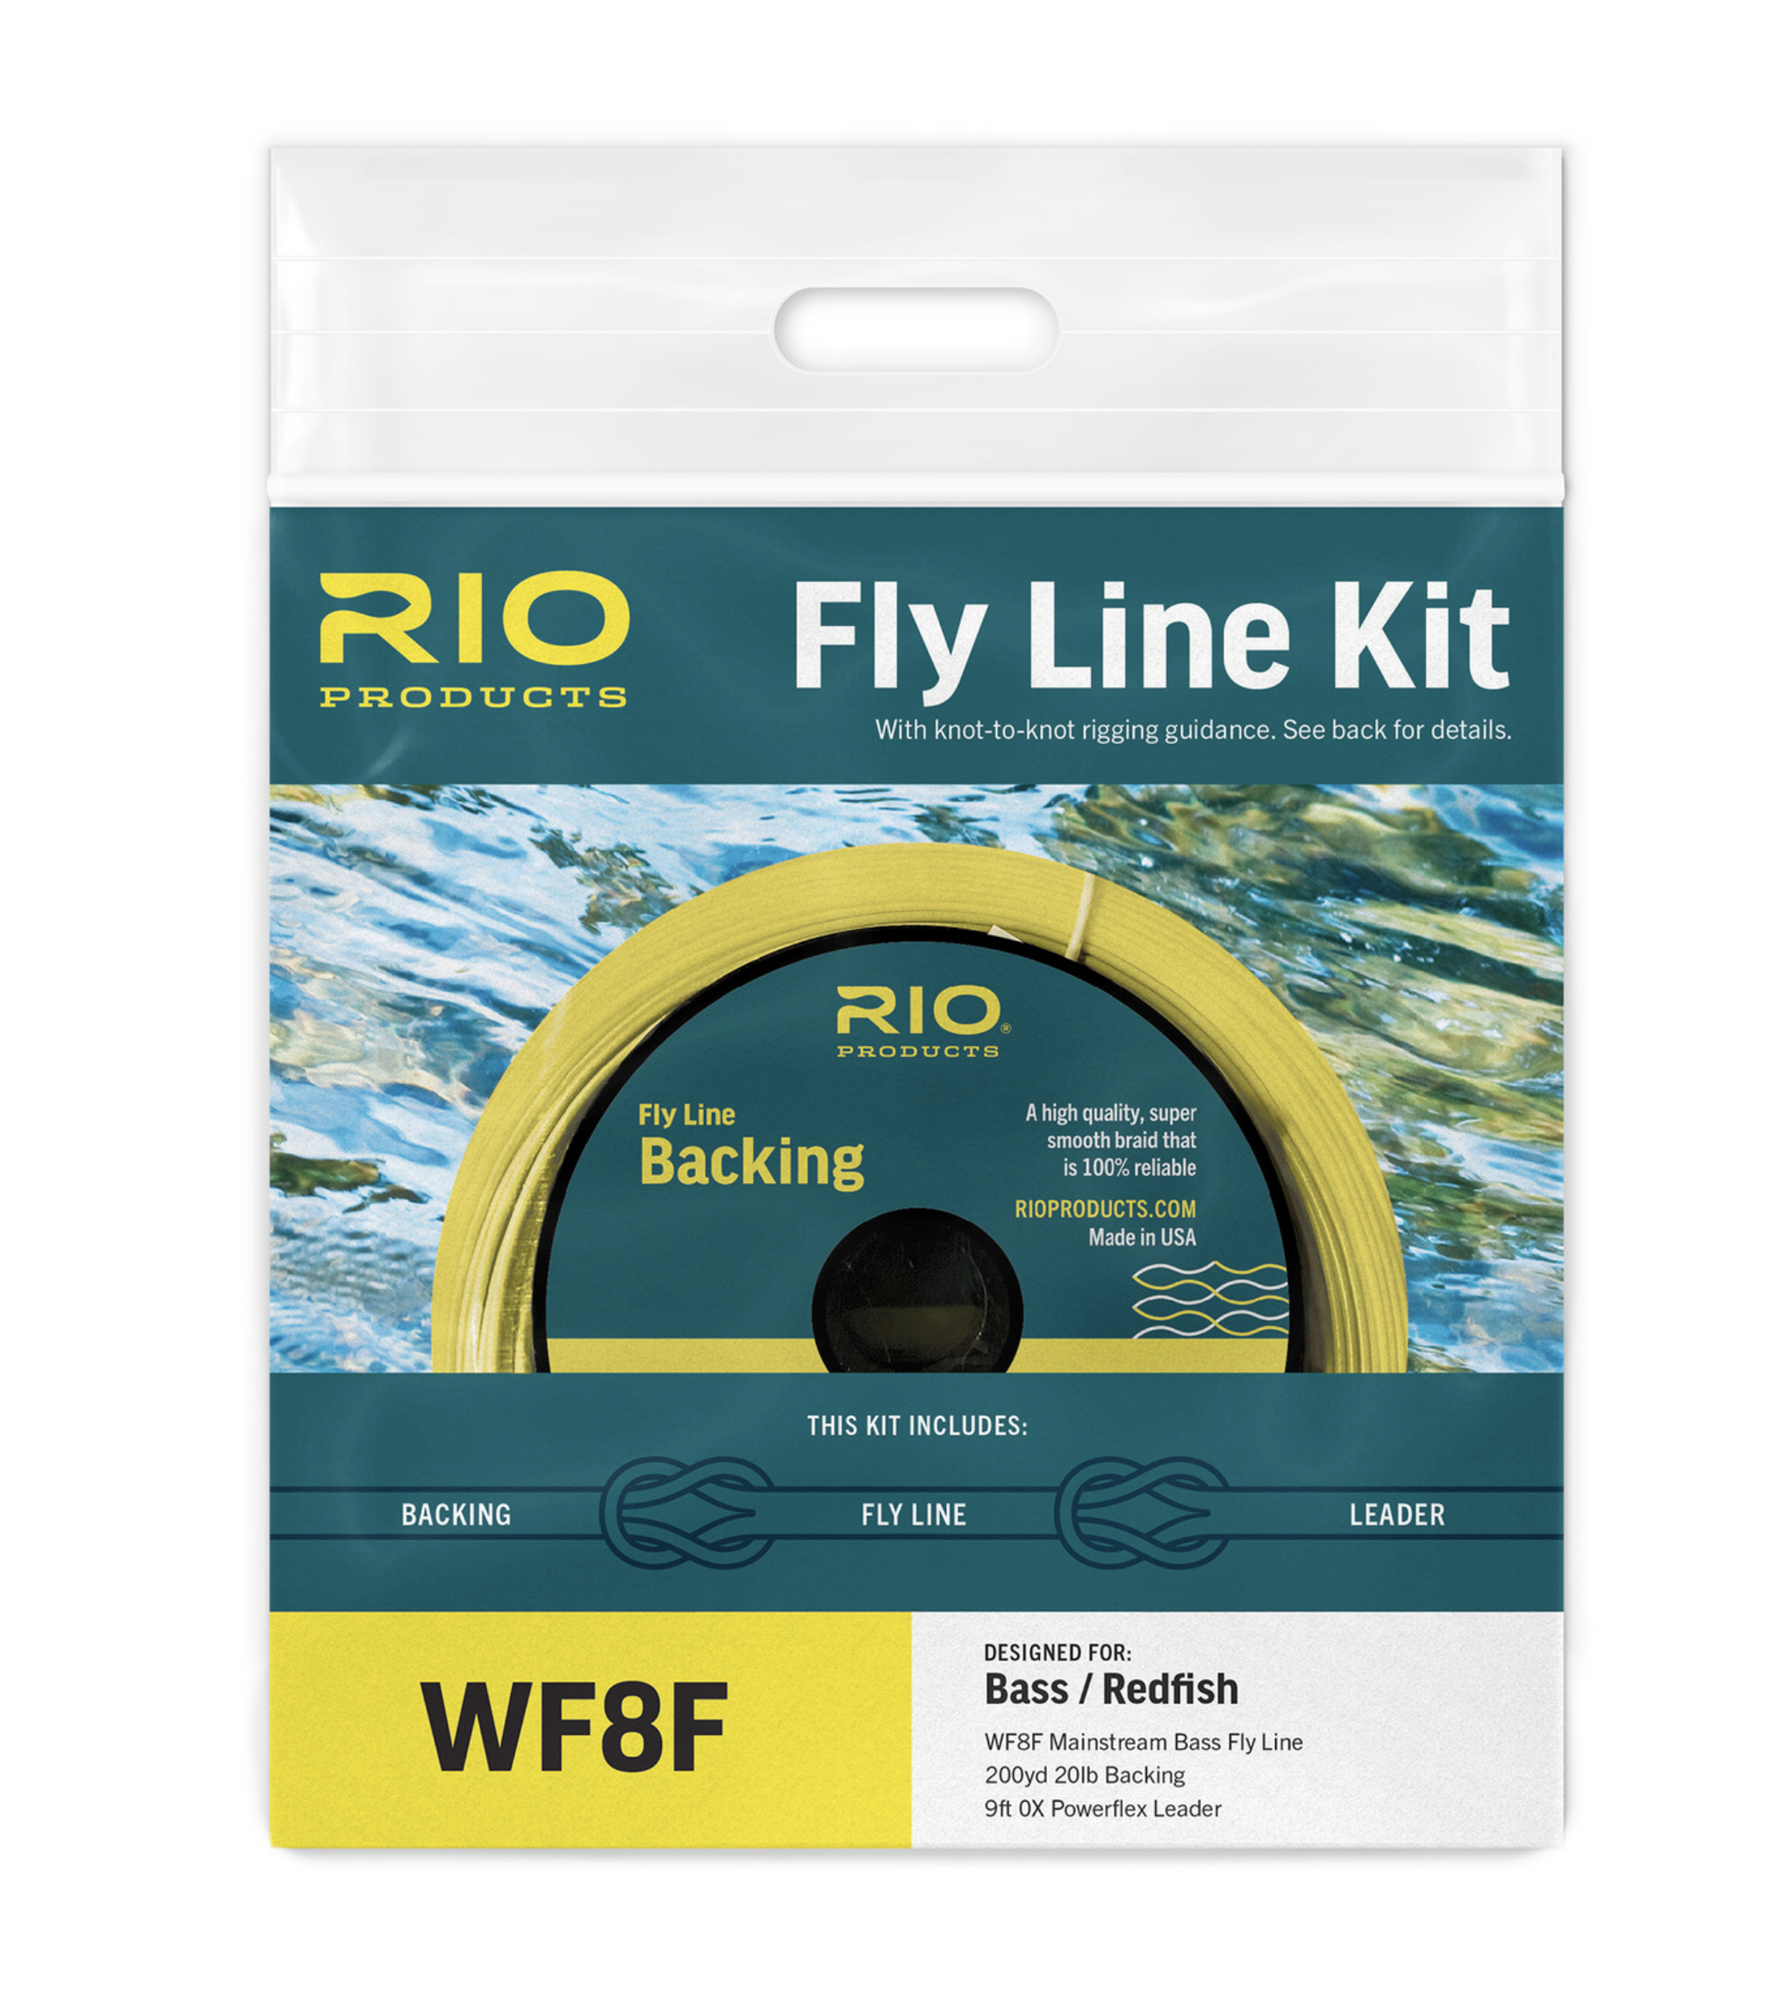 https://www.theflyfishers.com/Content/files/RIO/FlyLines/FlyLineKit4wt.png